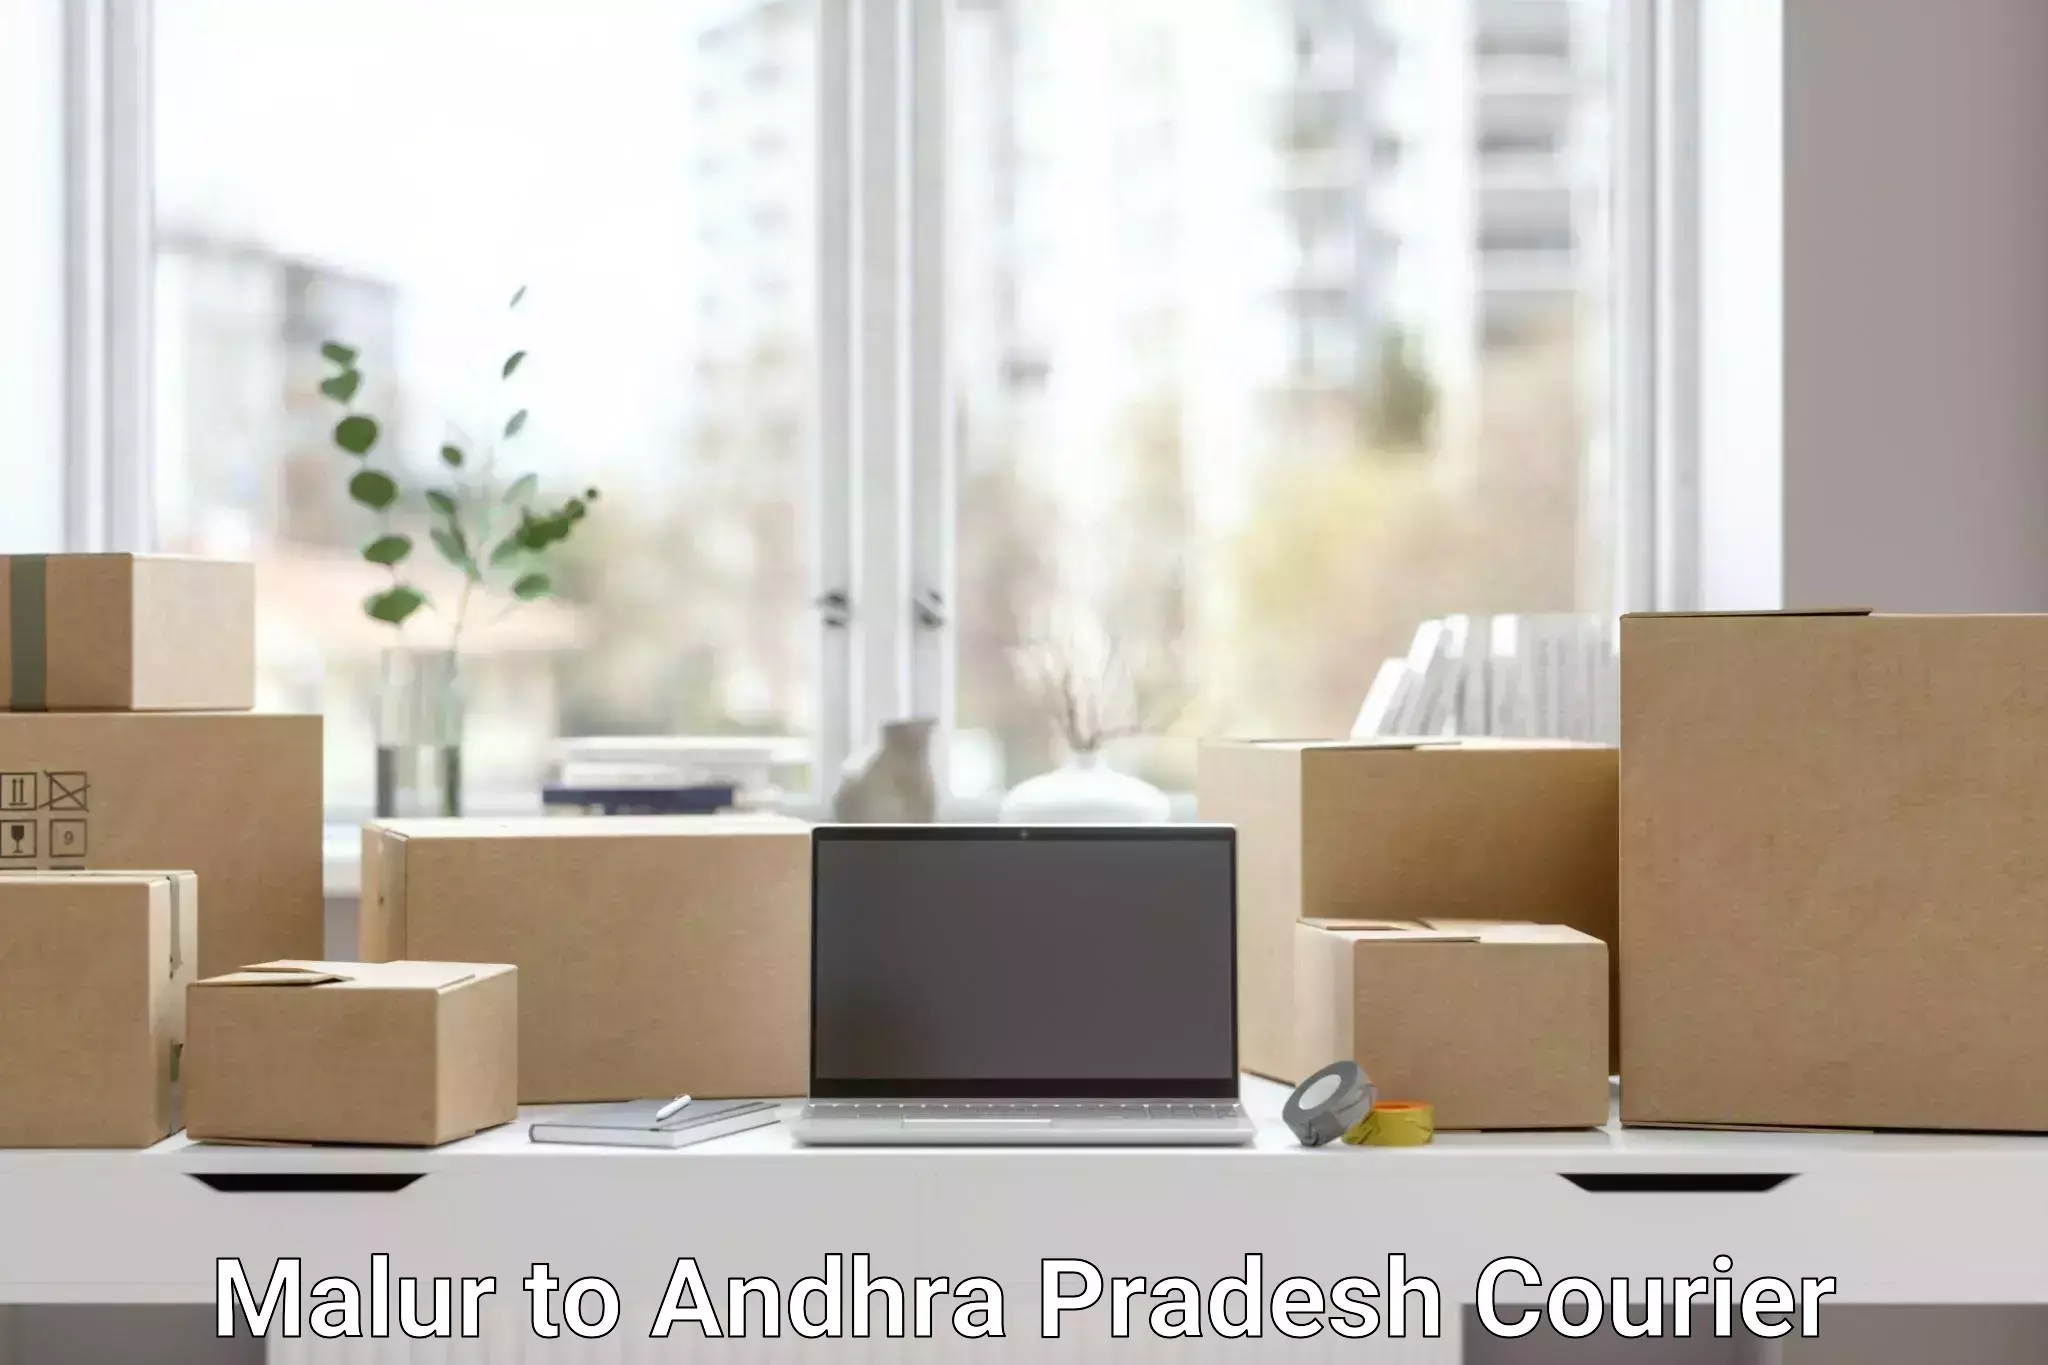 Expedited parcel delivery in Malur to Guntur